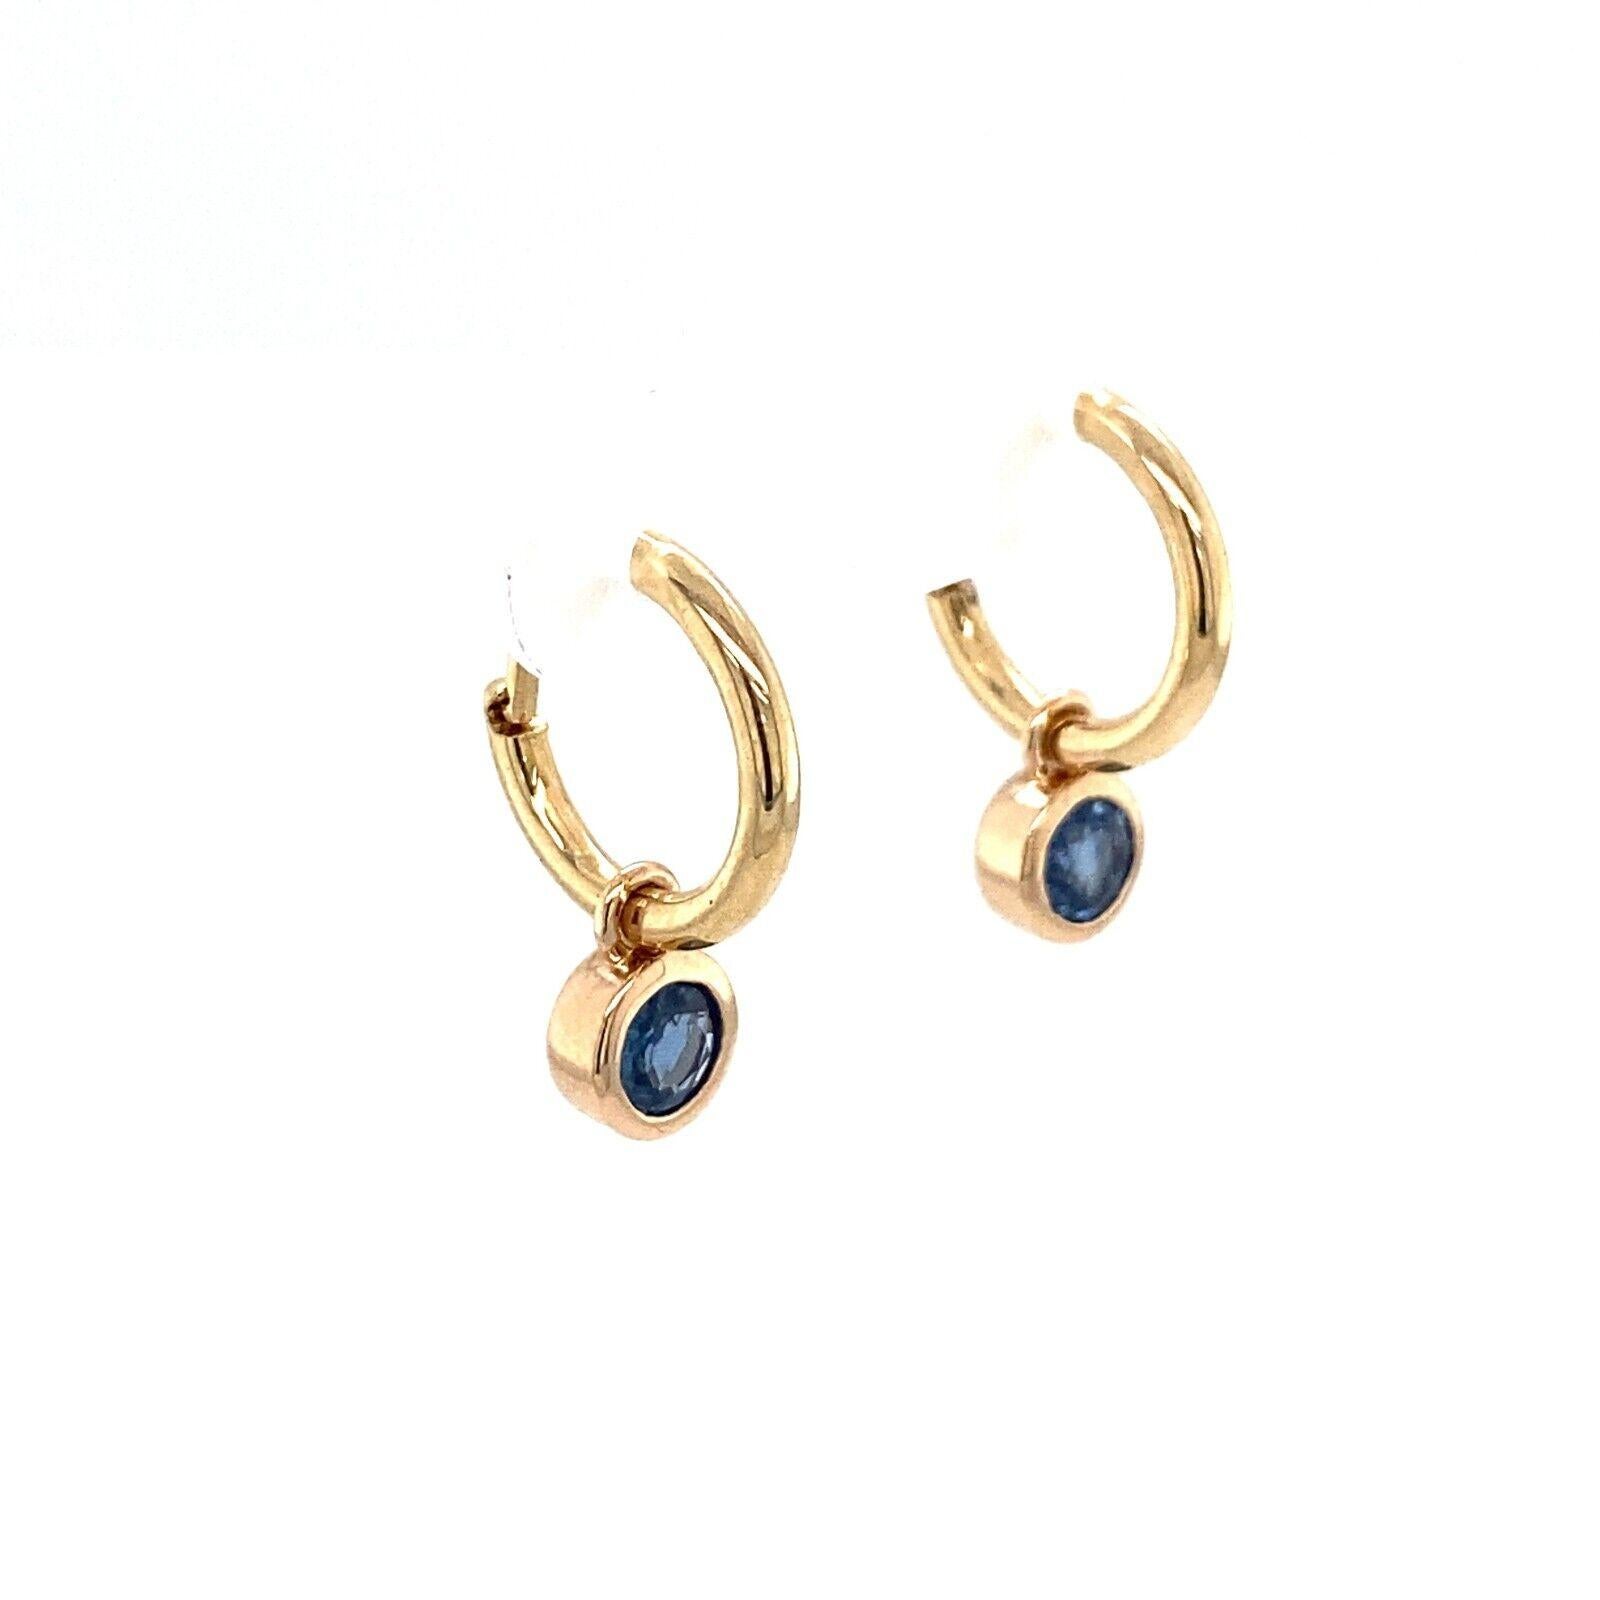 These stunning earrings are the perfect pair to add to your collection. These 14ct yellow gold hoop earrings have a total of 0.60ct round brilliant cut natural sapphires is set in a bezel setting and attached to the hoop plain earring.

Additional